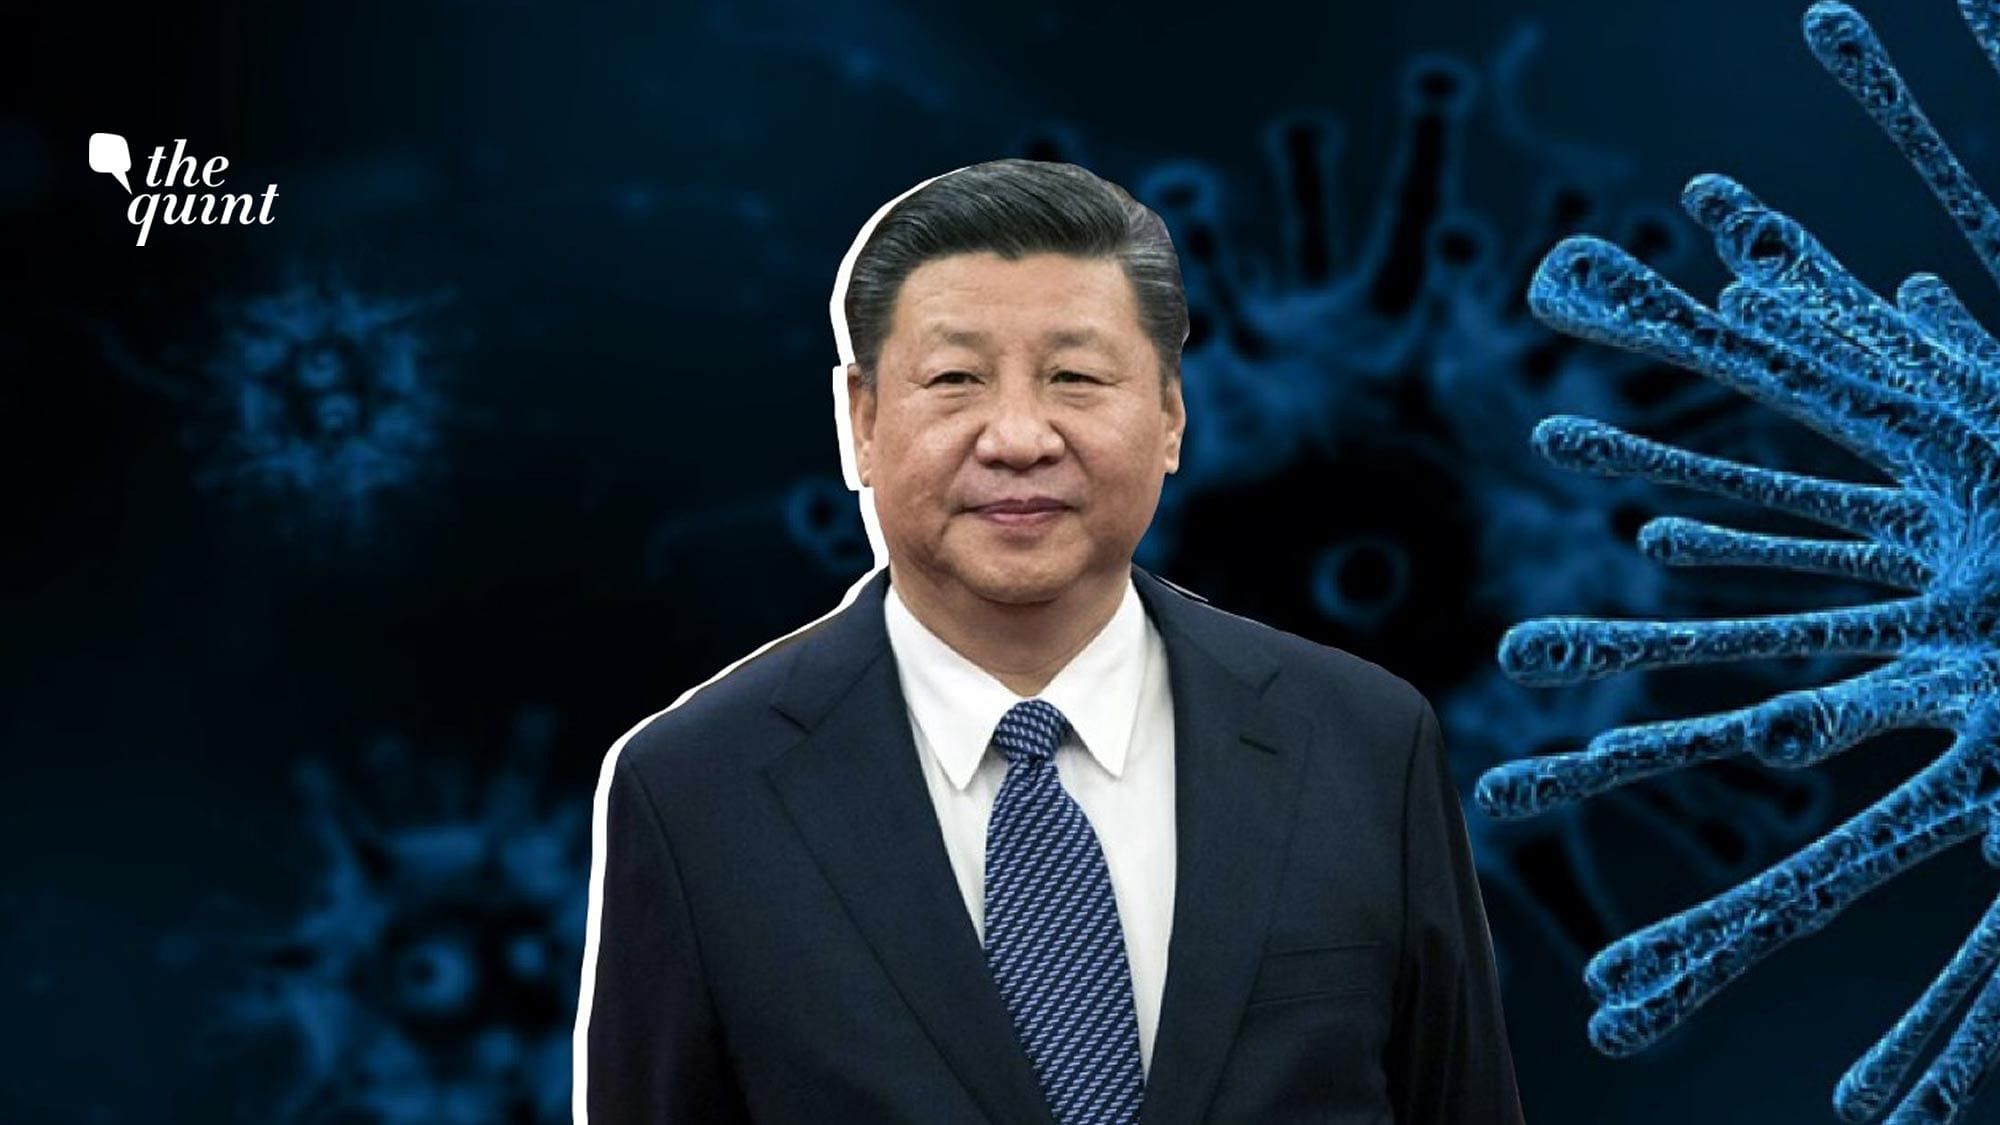 Image of Chinese President Xi Jinping, used for representational purposes.